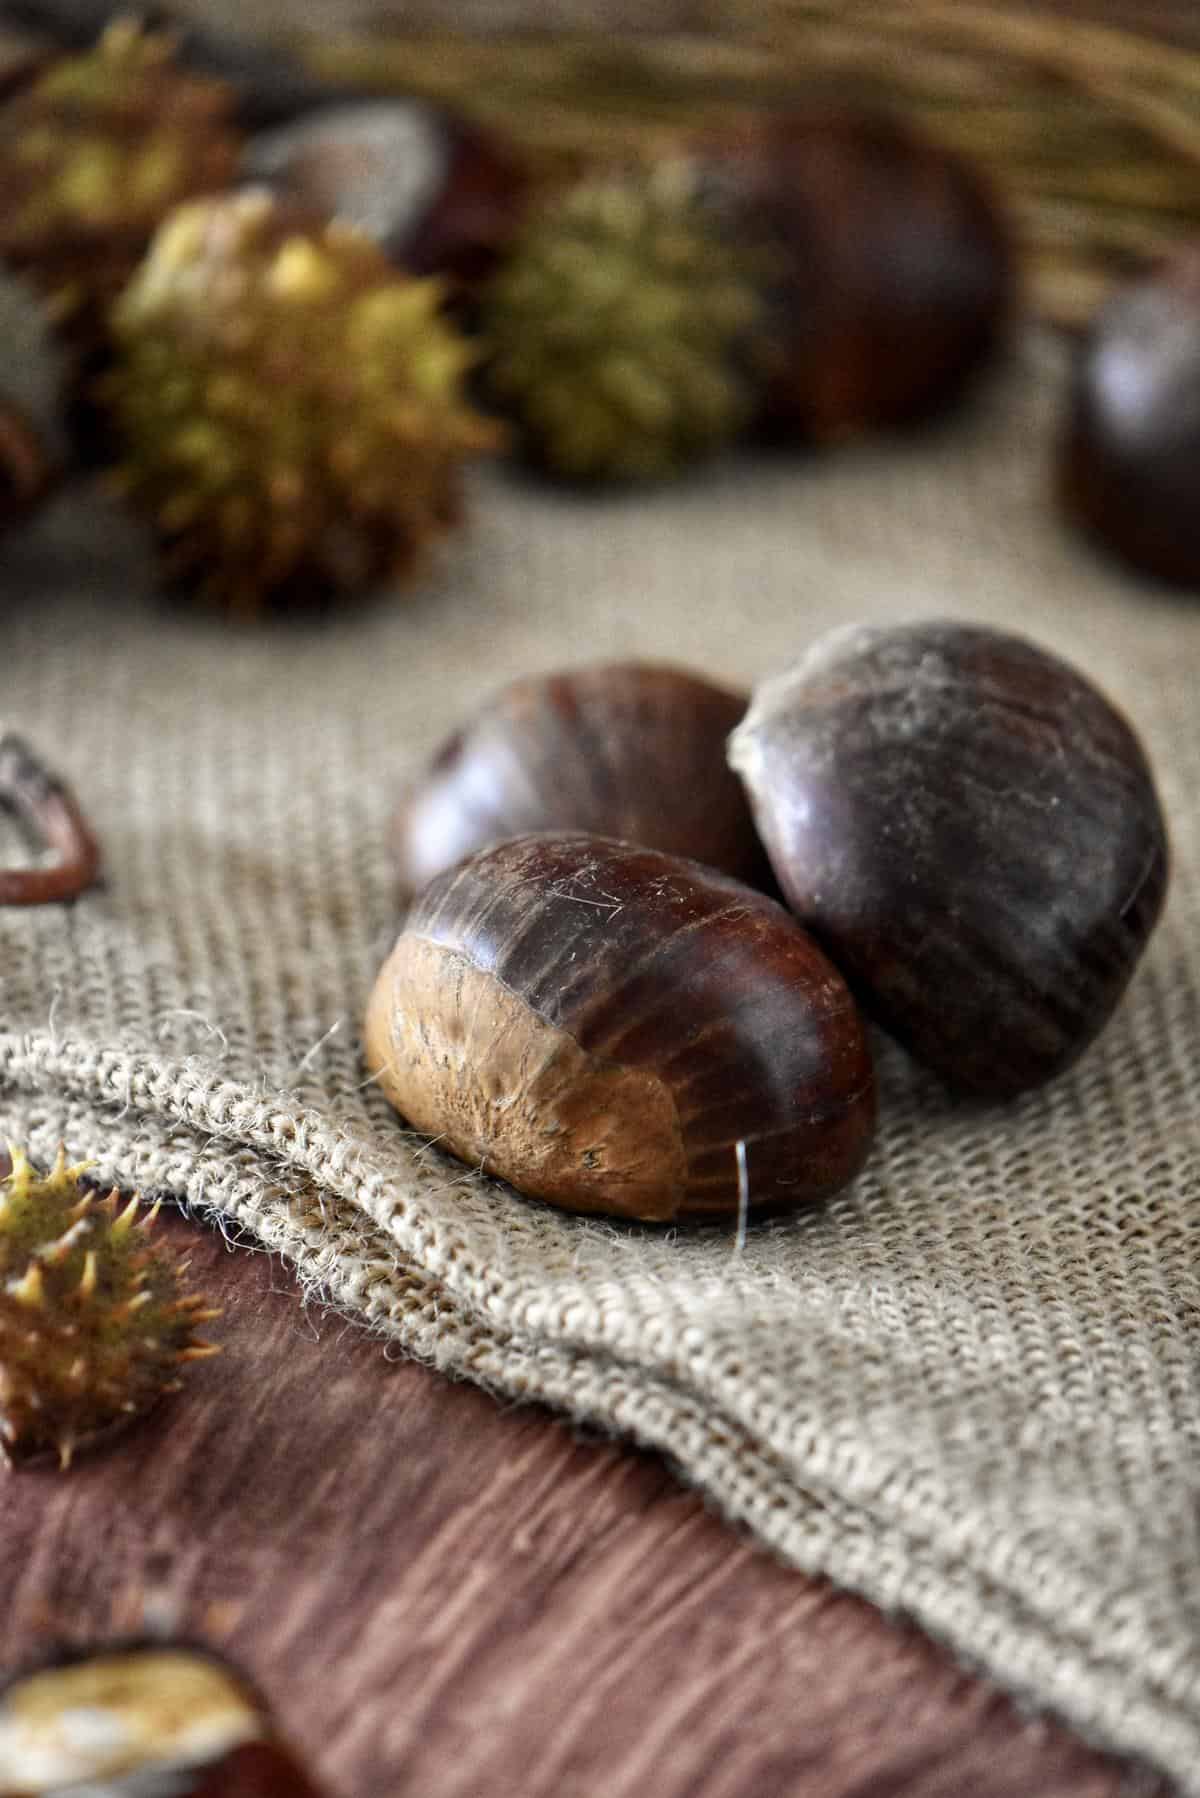 A group of three chestnuts on a Chestnuts on a burlap sack.